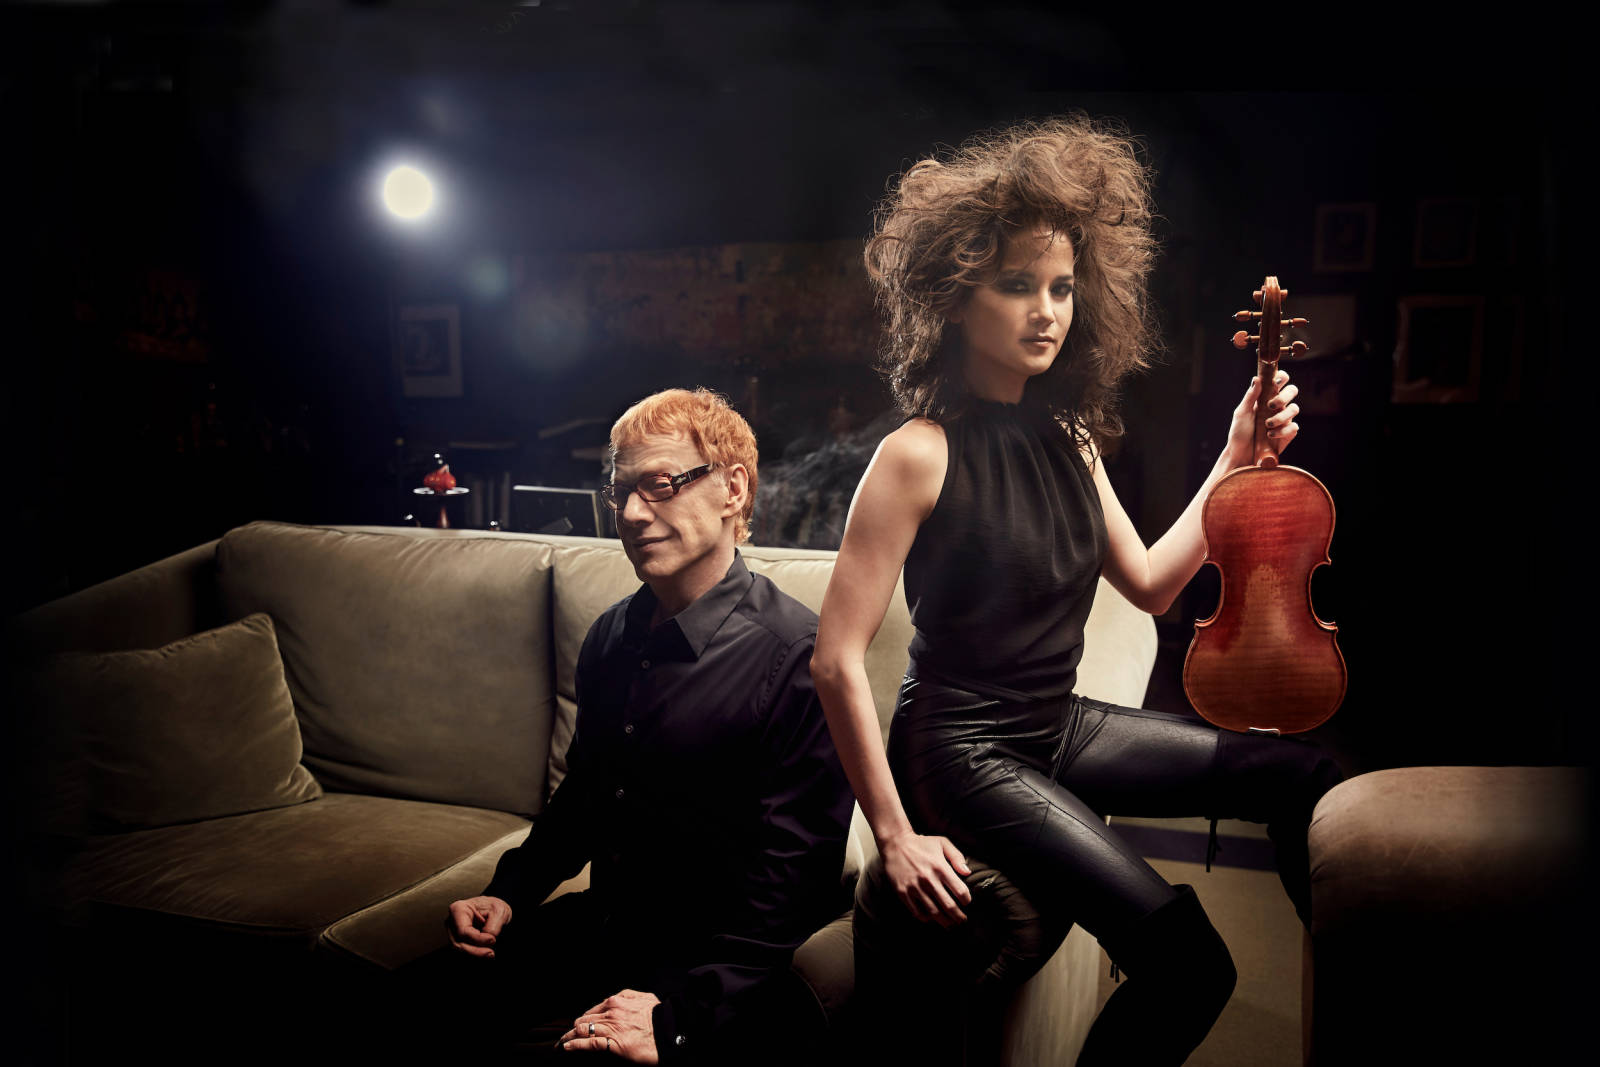 Concerto for Violin and Orchestra “Eleven Eleven” composed by Danny Elfman - Composers